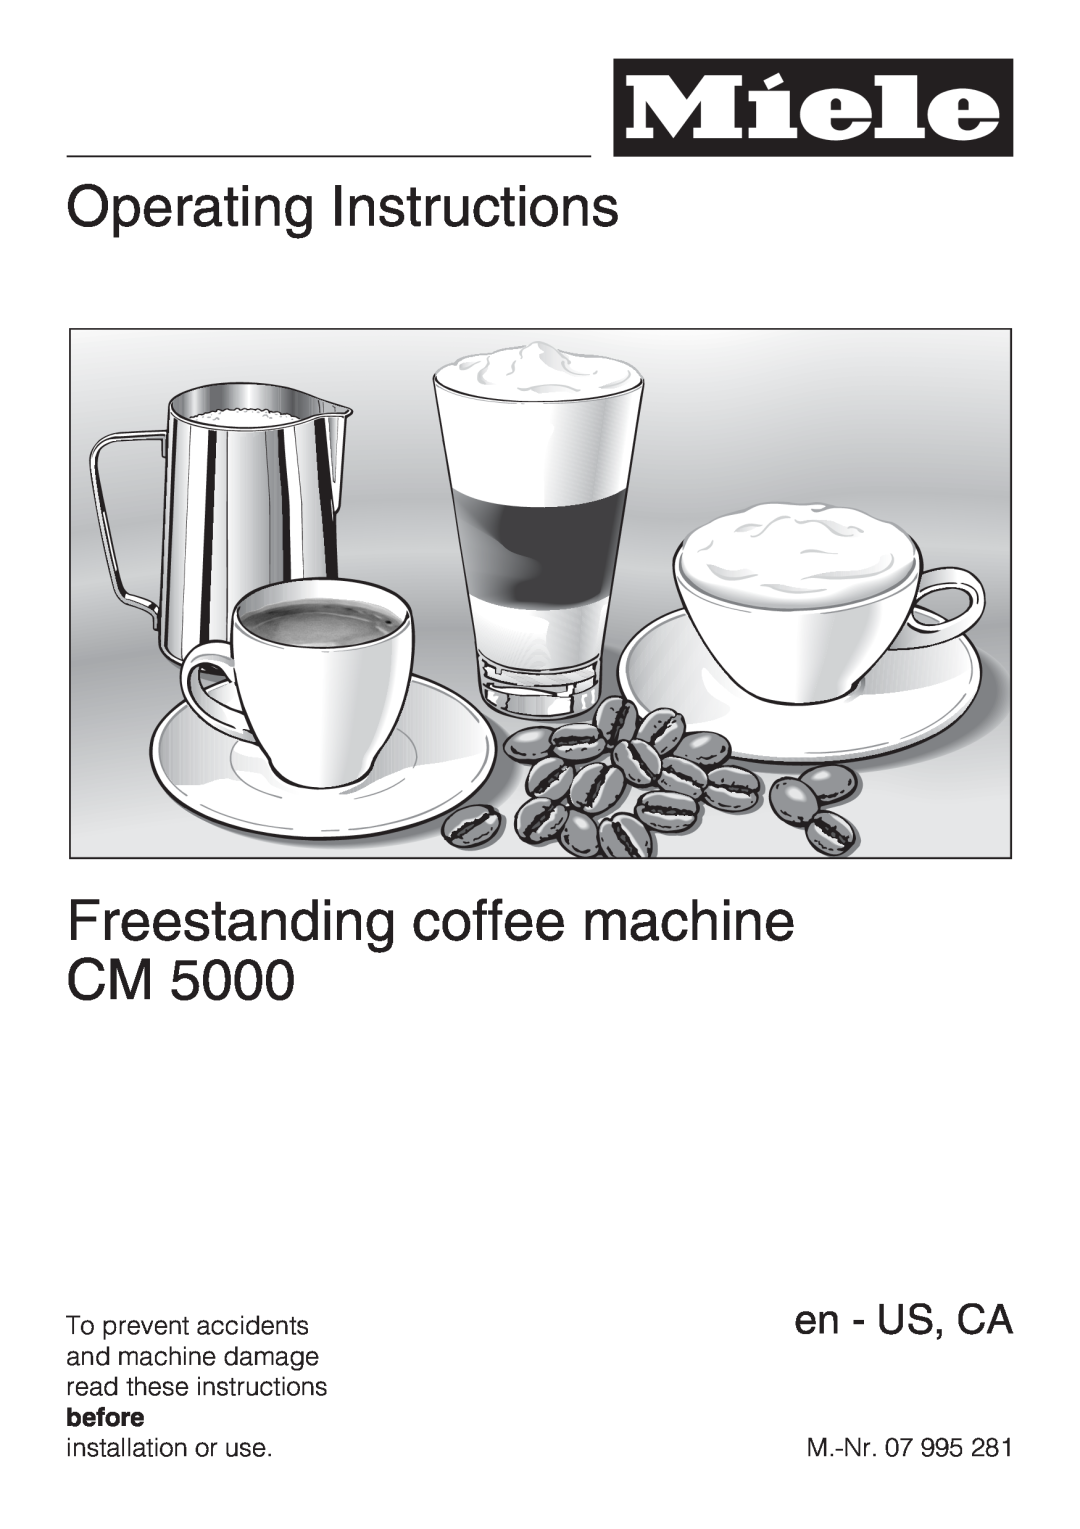 Miele CM 5000 operating instructions Operating Instructions, Freestanding coffee machine CM, en - US, CA 